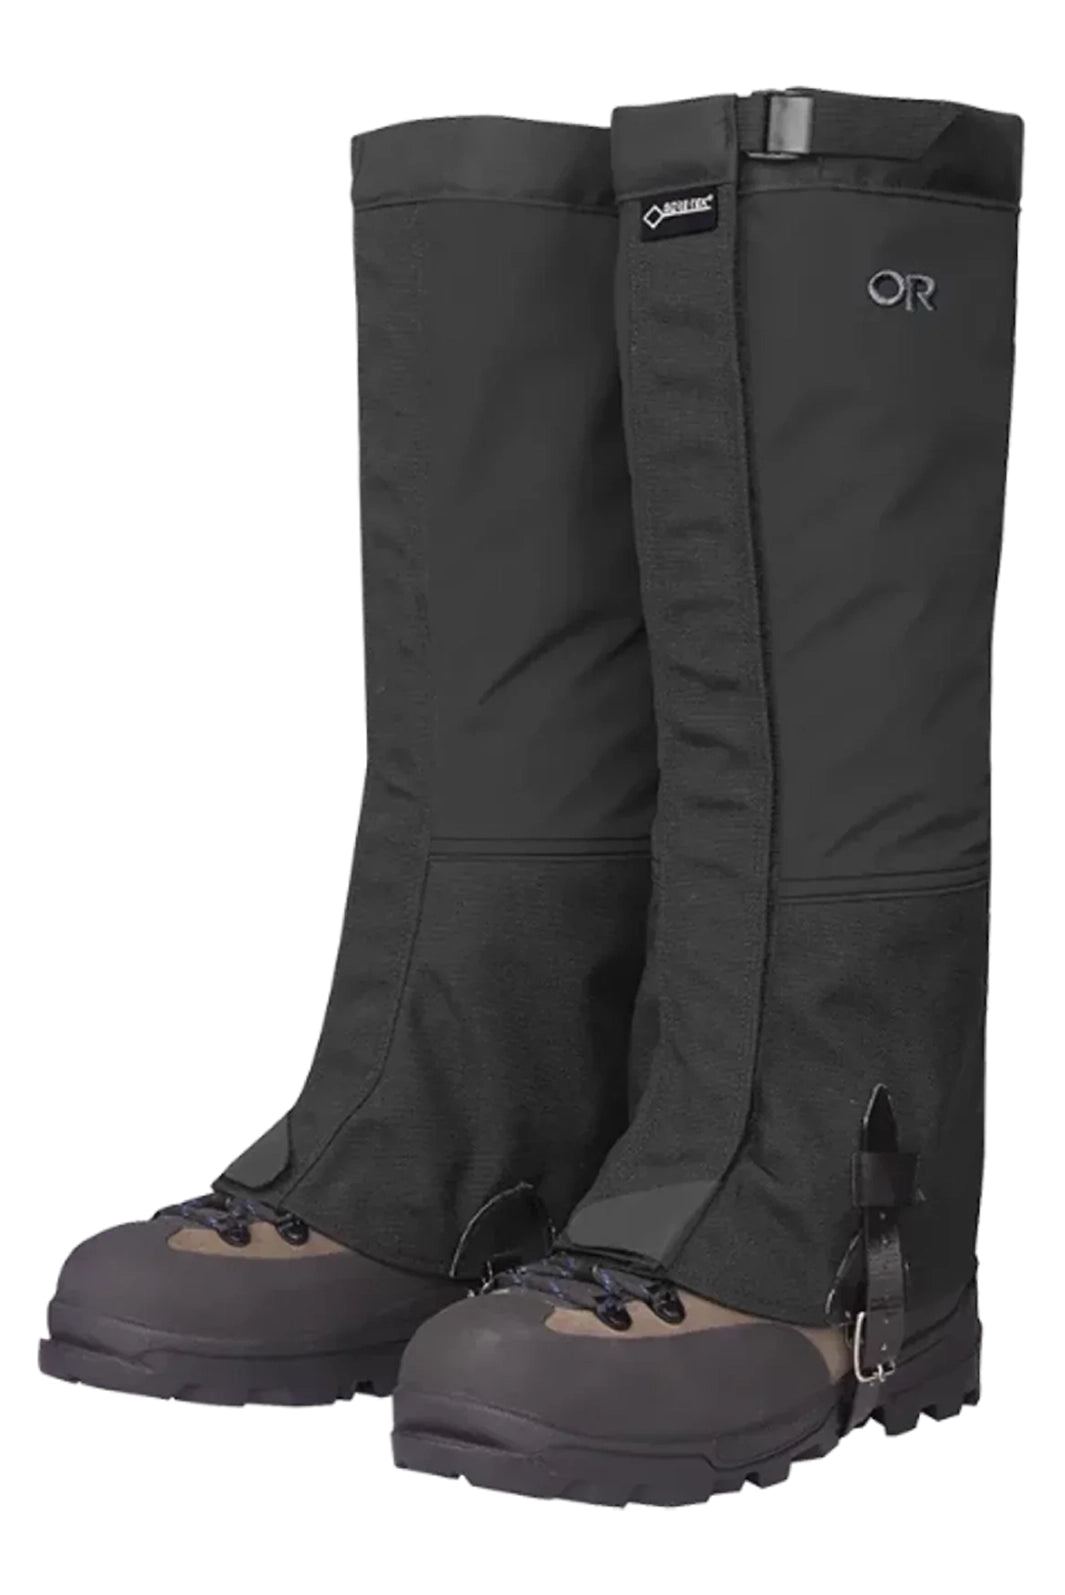 Outdoor Research Gaiters